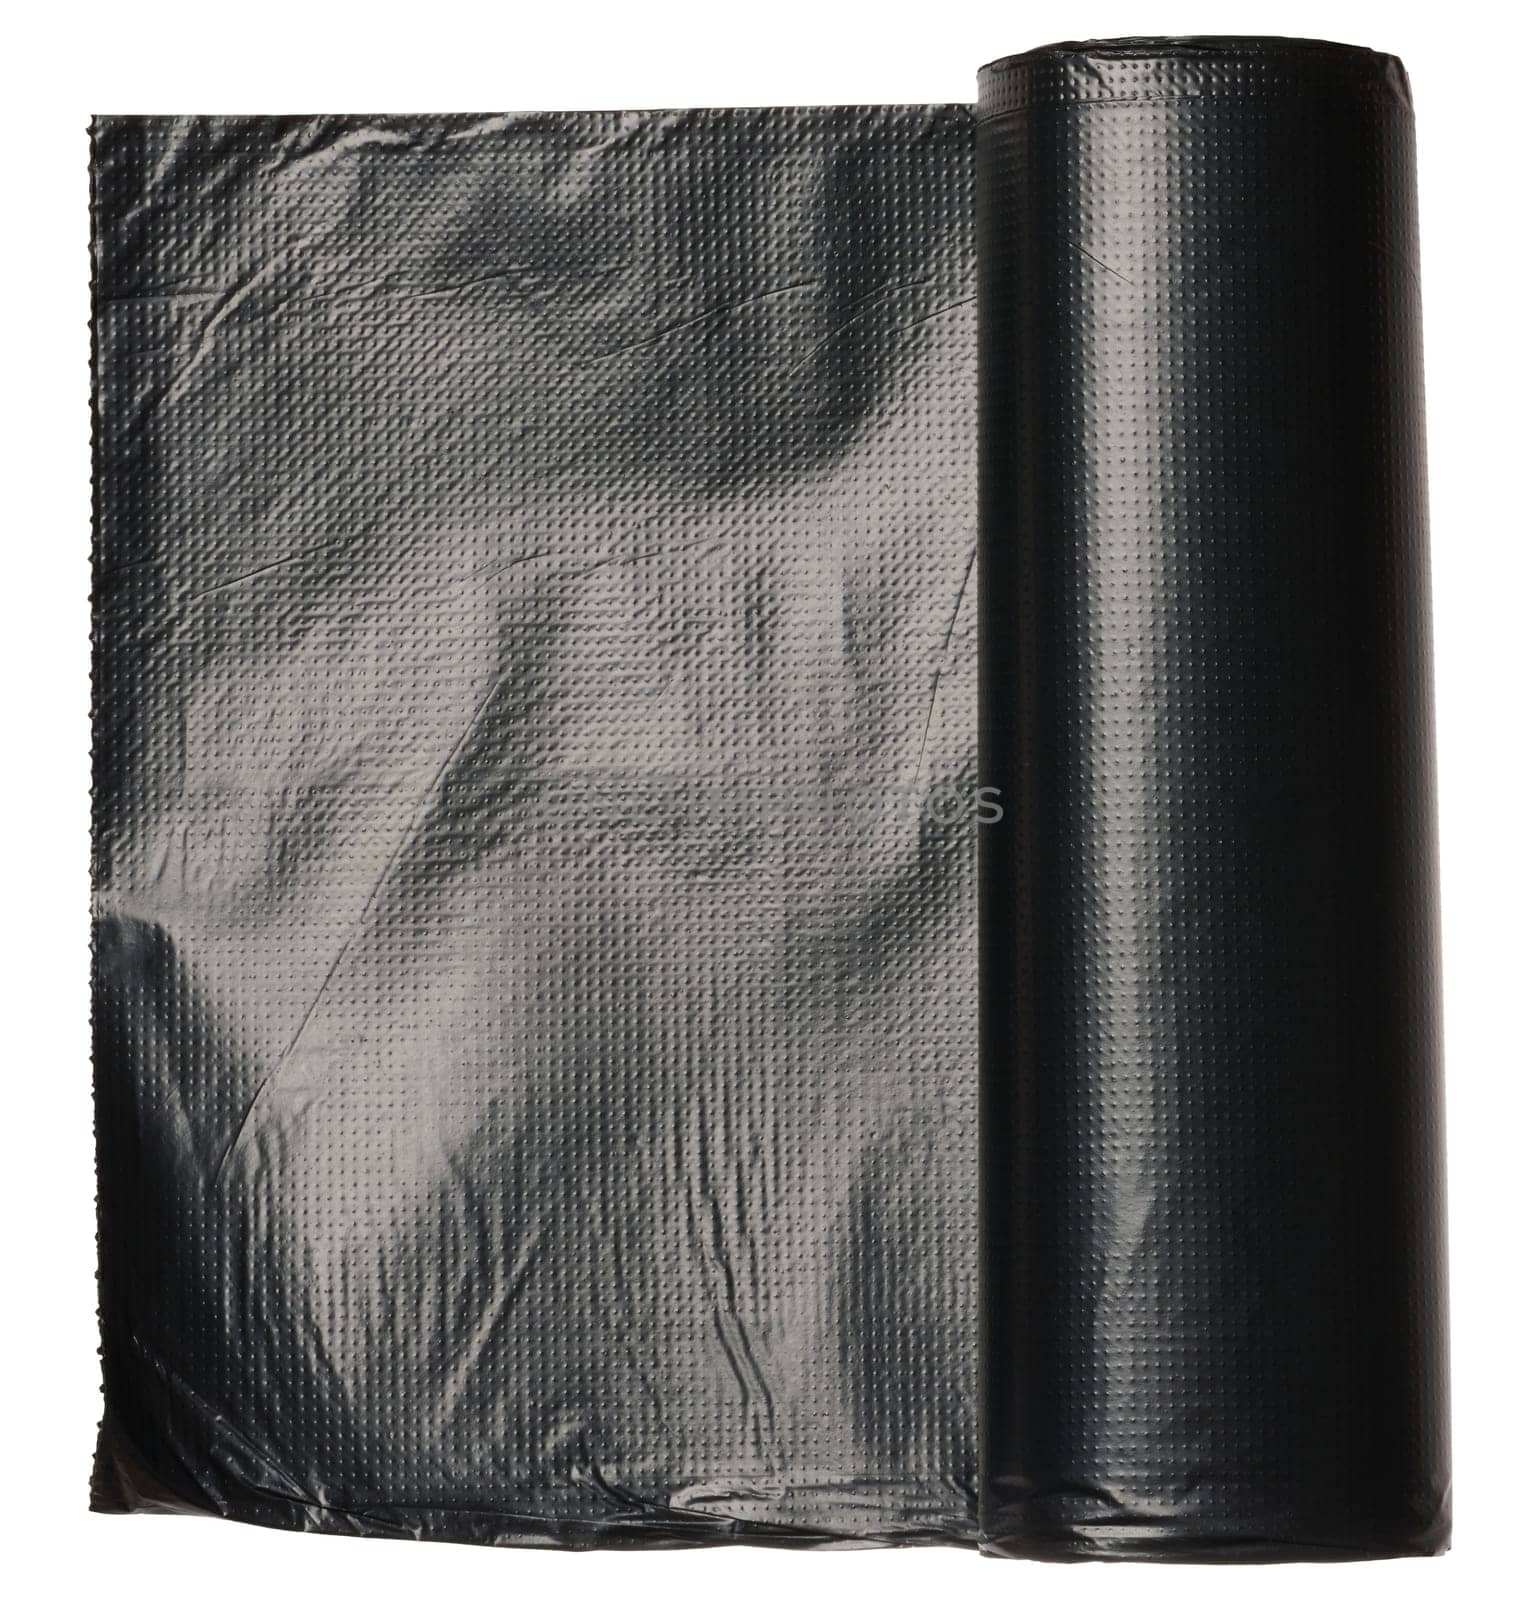 Roll of black plastic bags on isolated background